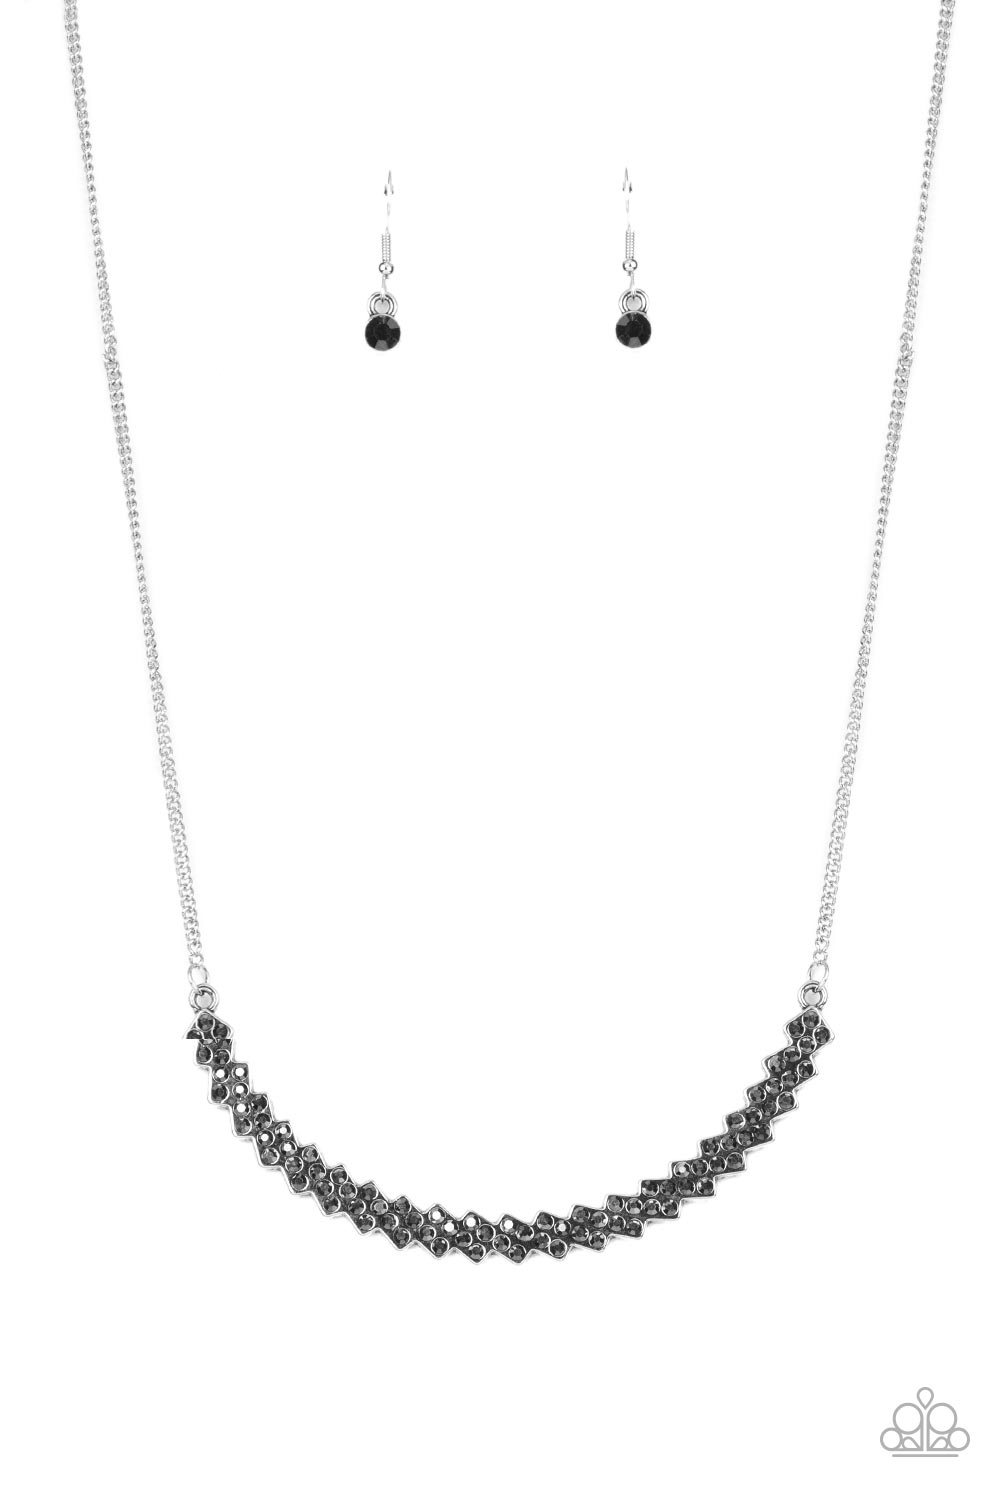 Dicey Demure Paparazzi Accessories Necklace with Earrings - Silver